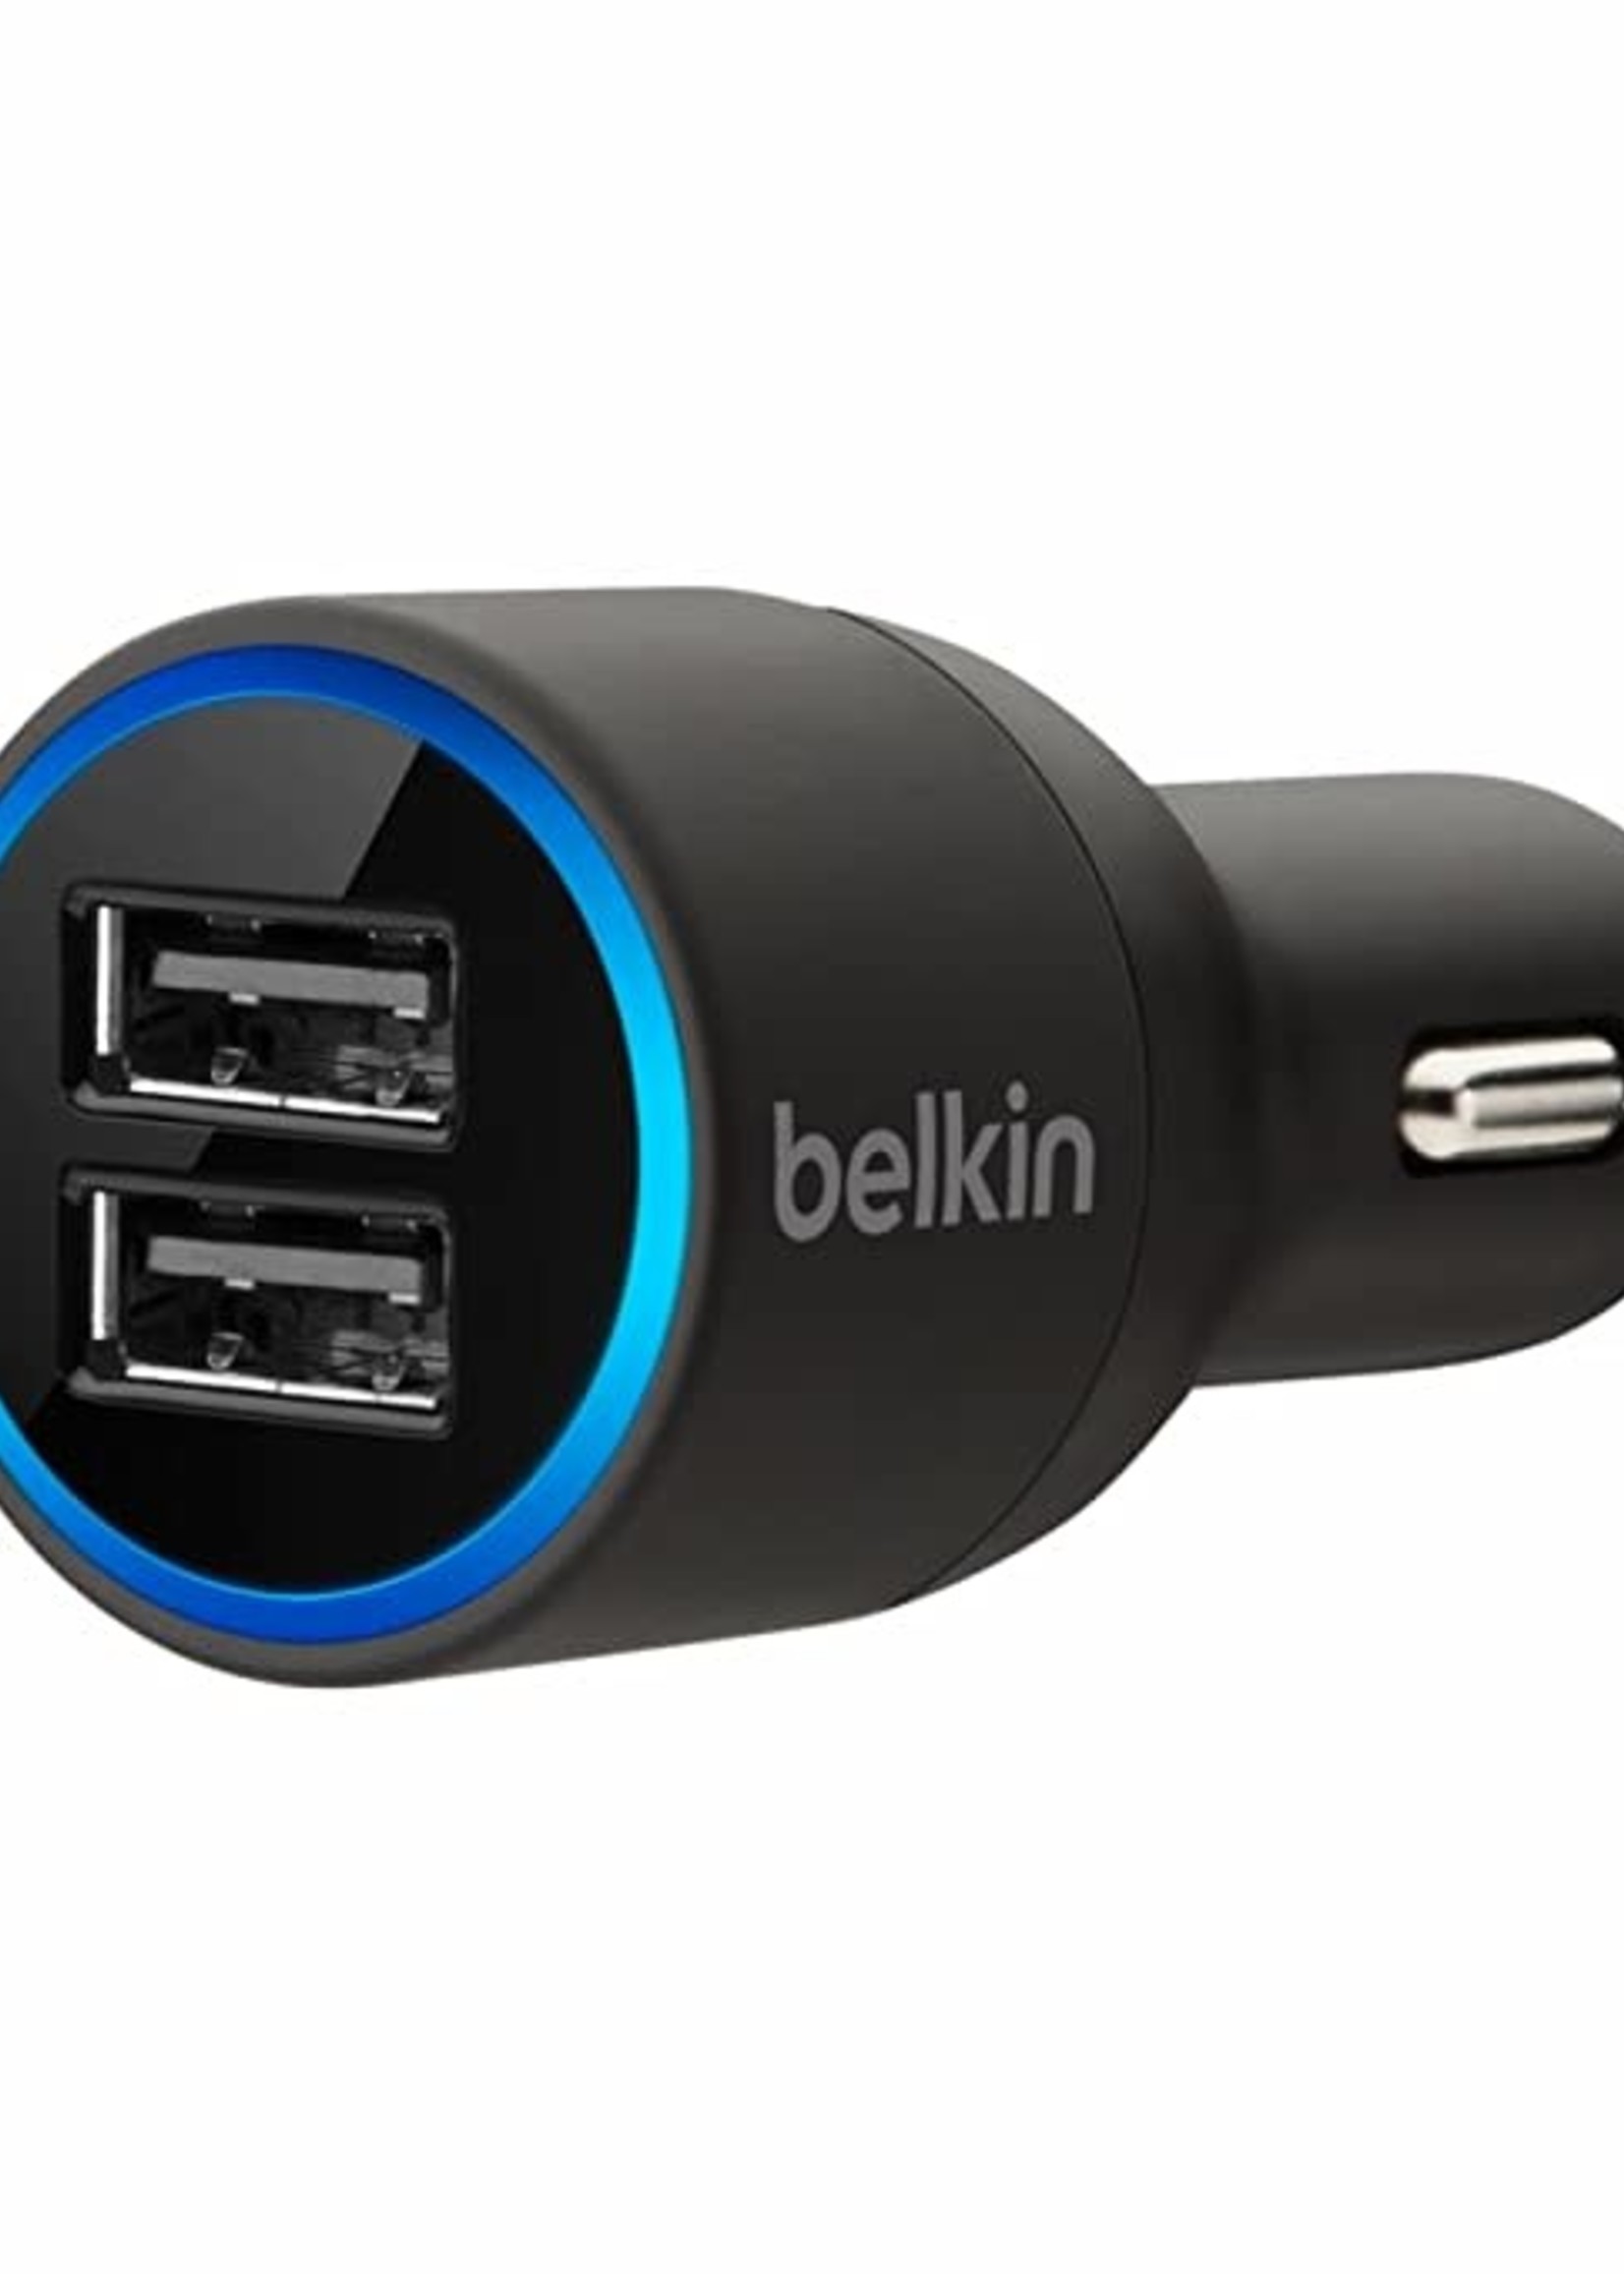 BELKIN Belkin 2.1A Charger with 2 USB ports